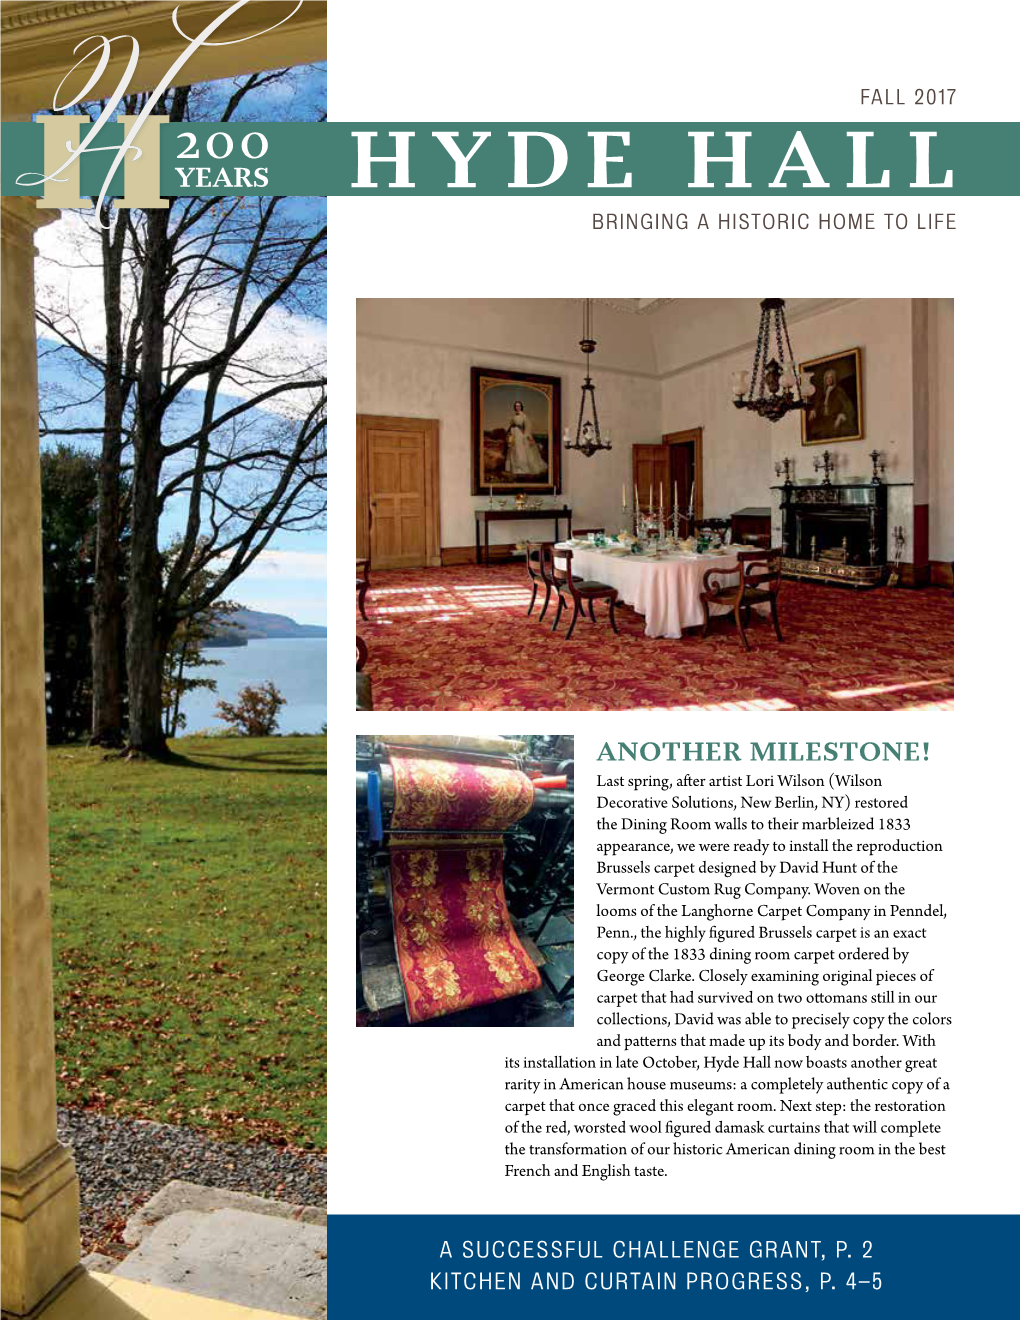 Fall 2017 Hyde Hall Bringing a Historic Home to Life